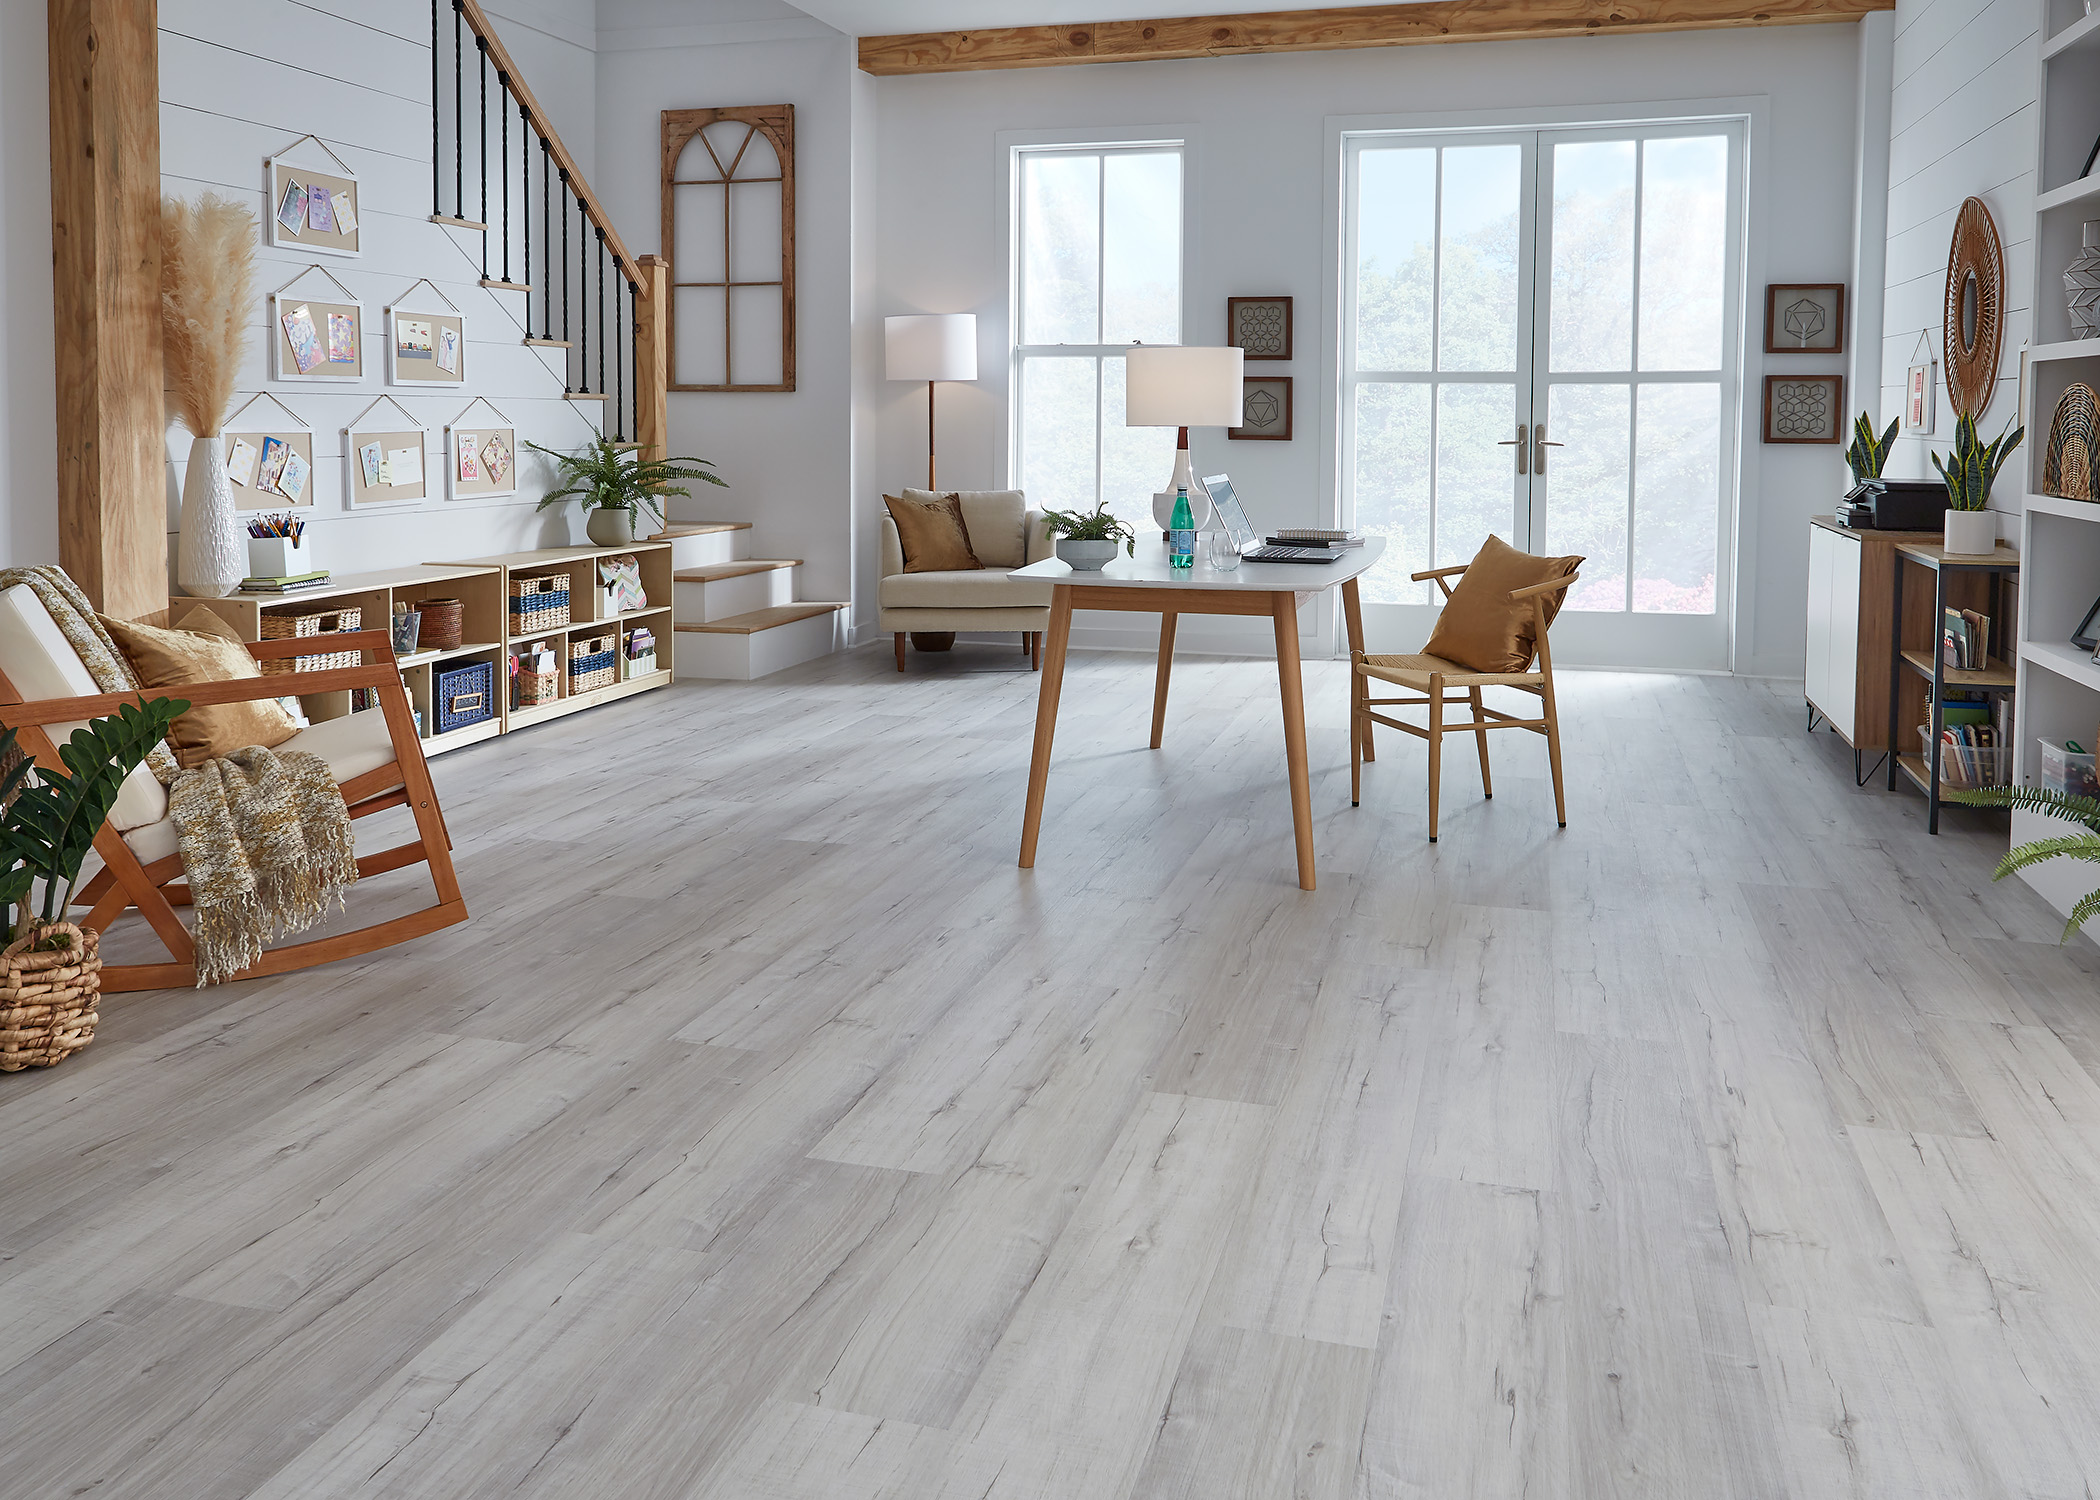 Tfloor Laminate Flooring Spacers : for Installing Laminate Wood, Vinyl Plank,  Engineered Hardwood, LVT, Bamboo, Subfloor Panels, or Any Floating Floor  Material. Made in The USA. : : Home Improvement